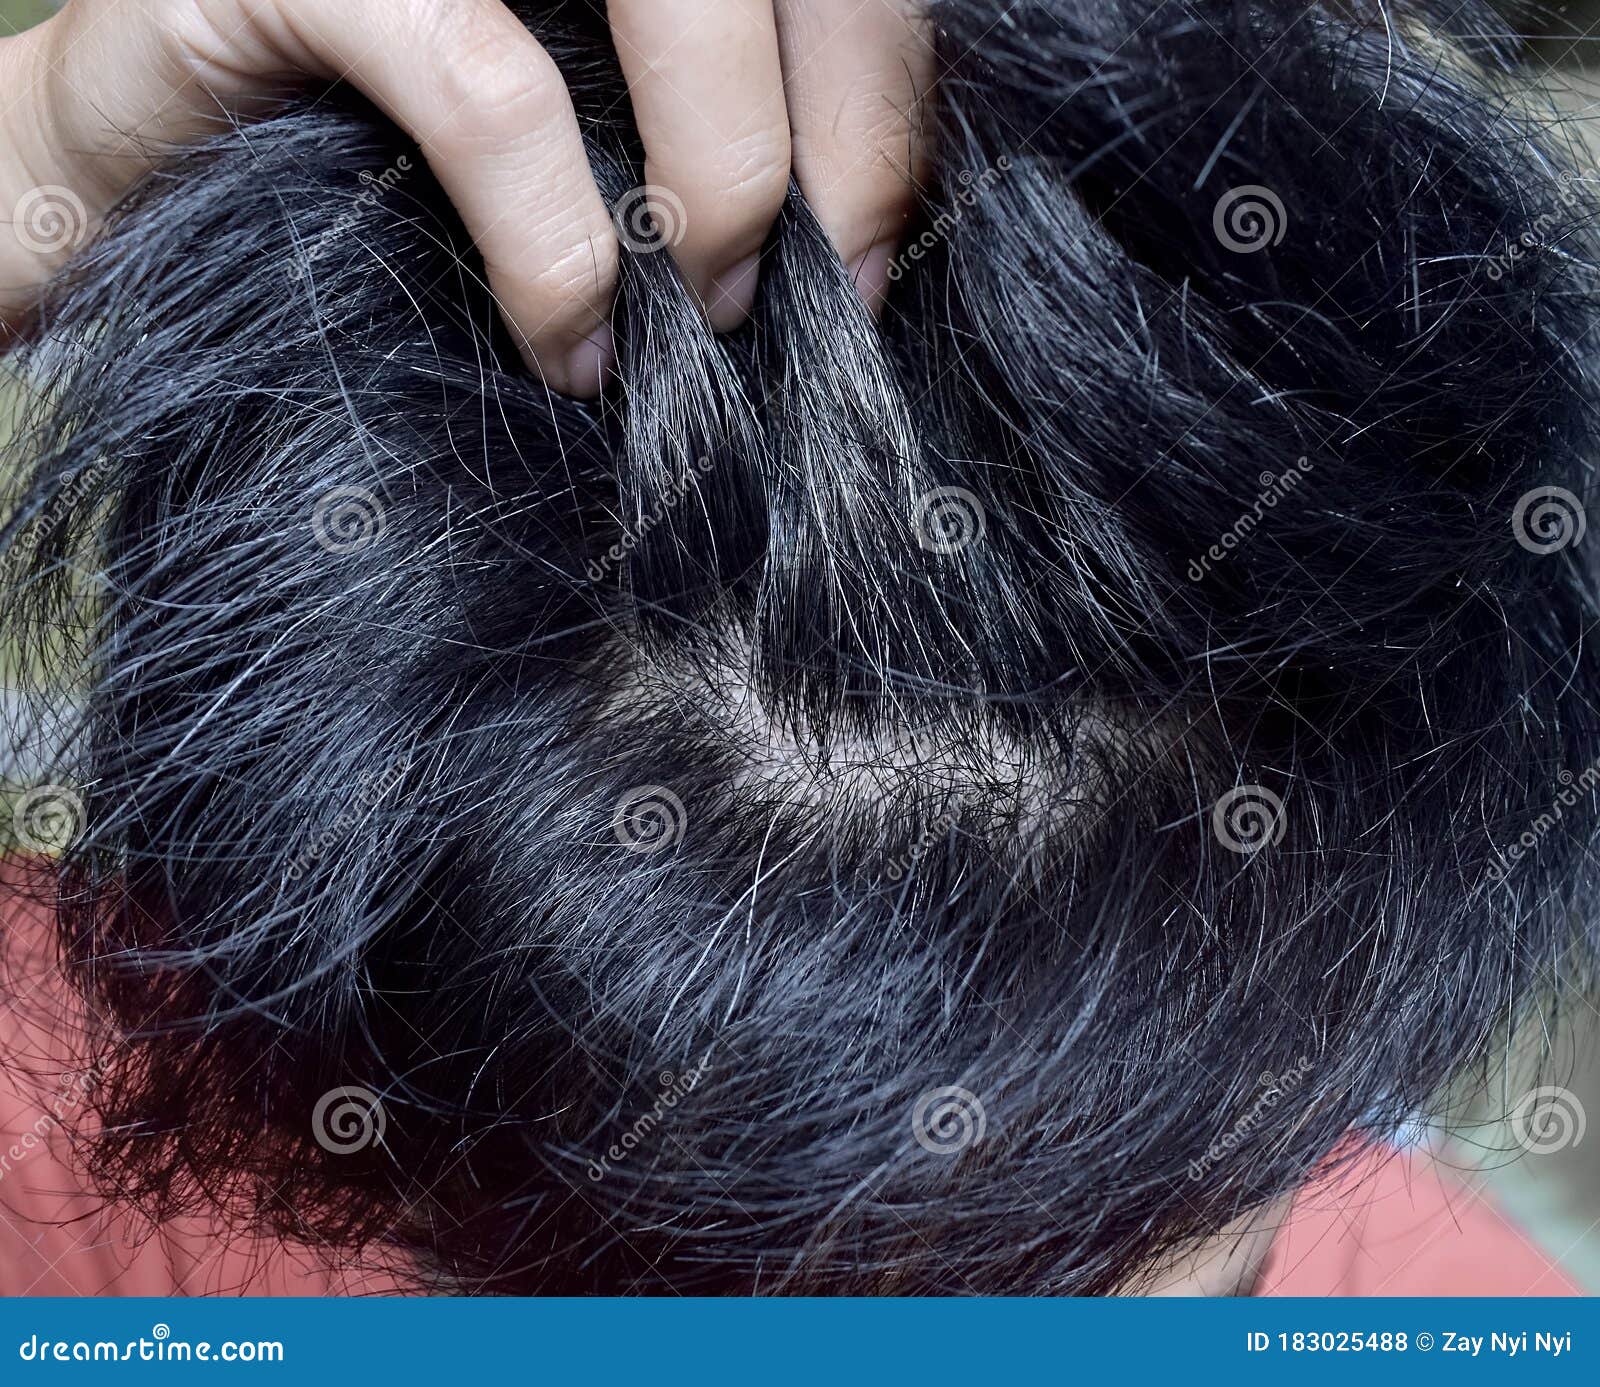 Prematurely Gray Hair. Southeast Asian Young Man Showing His Early Grey Hair  Stock Photo - Image of premature, asian: 183025488